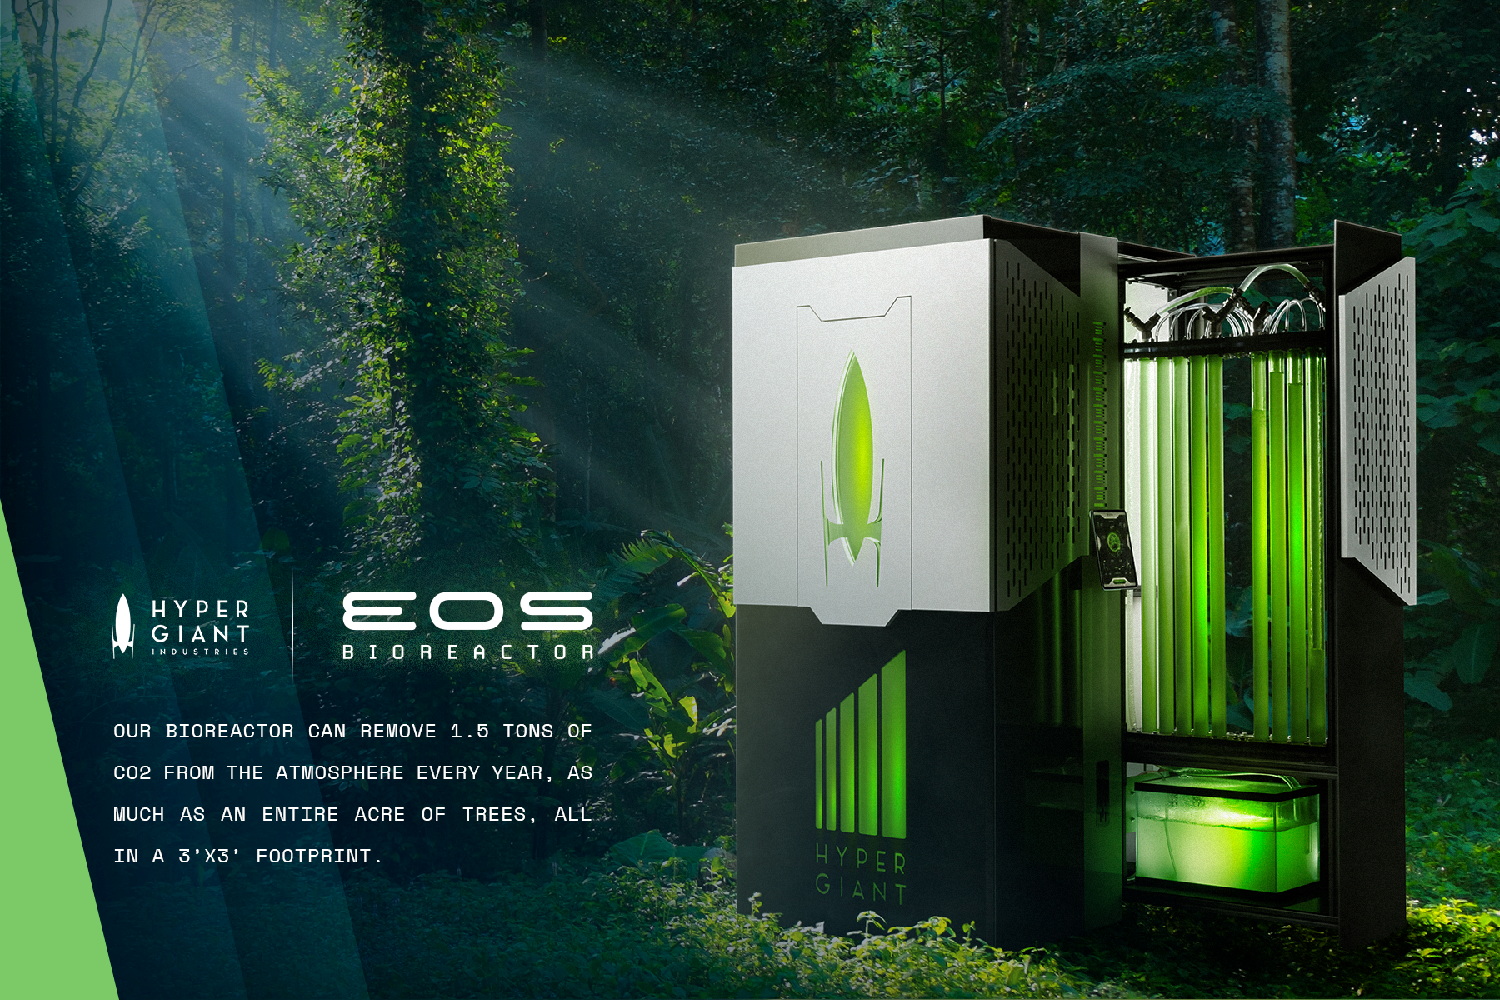 Hypergiant launched the Eos Bioreactor to help solve the CO2 problem by sequestering carbon more rapidly and more efficiently than trees - as each super-boosted algae bioreactor is 400 times more effective at capturing carbon than trees in the same unit area.